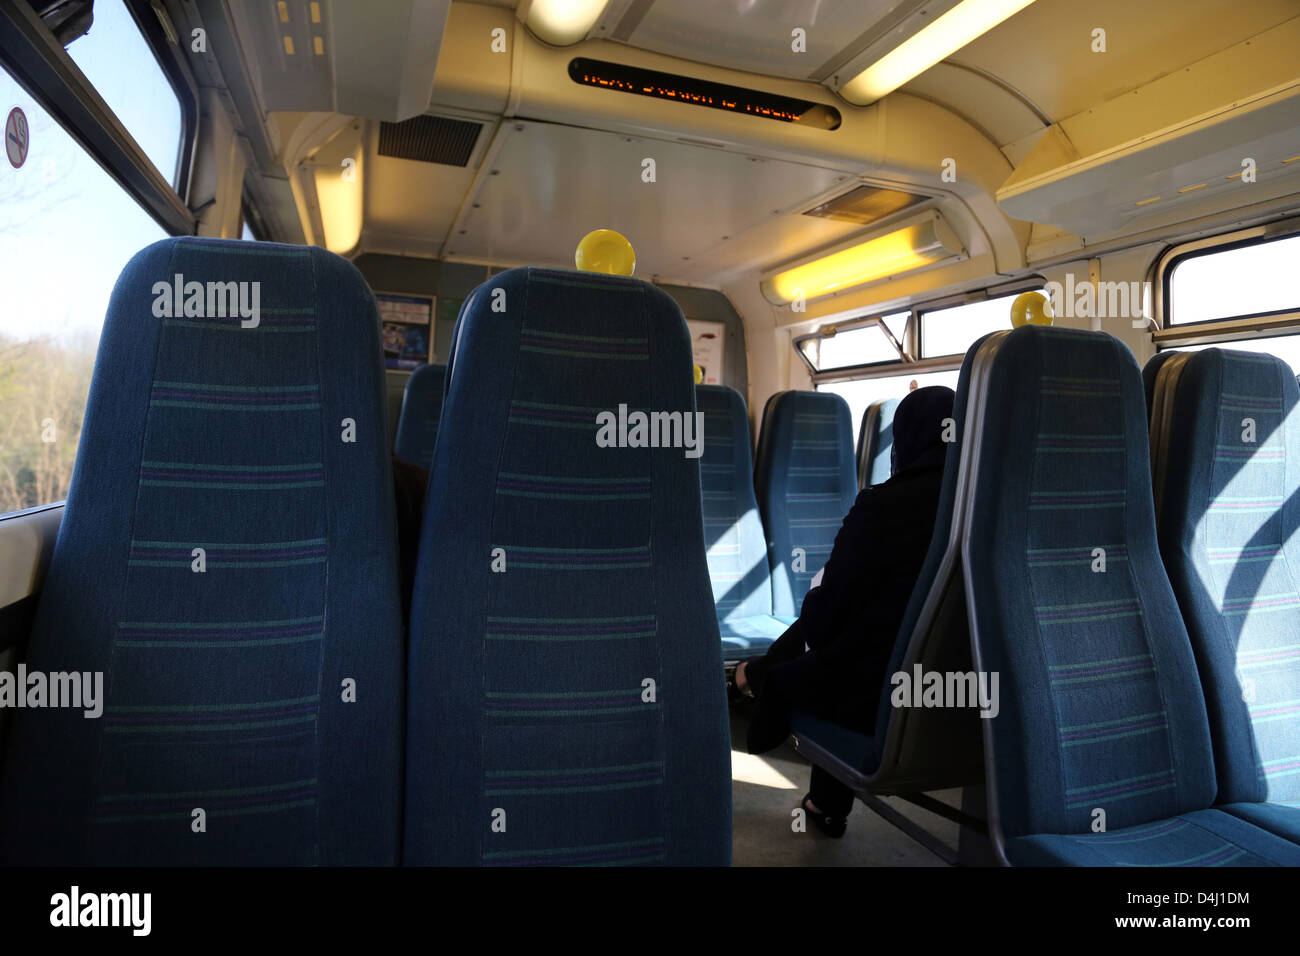 Seats On A Commuter Train To London England Stock Photo